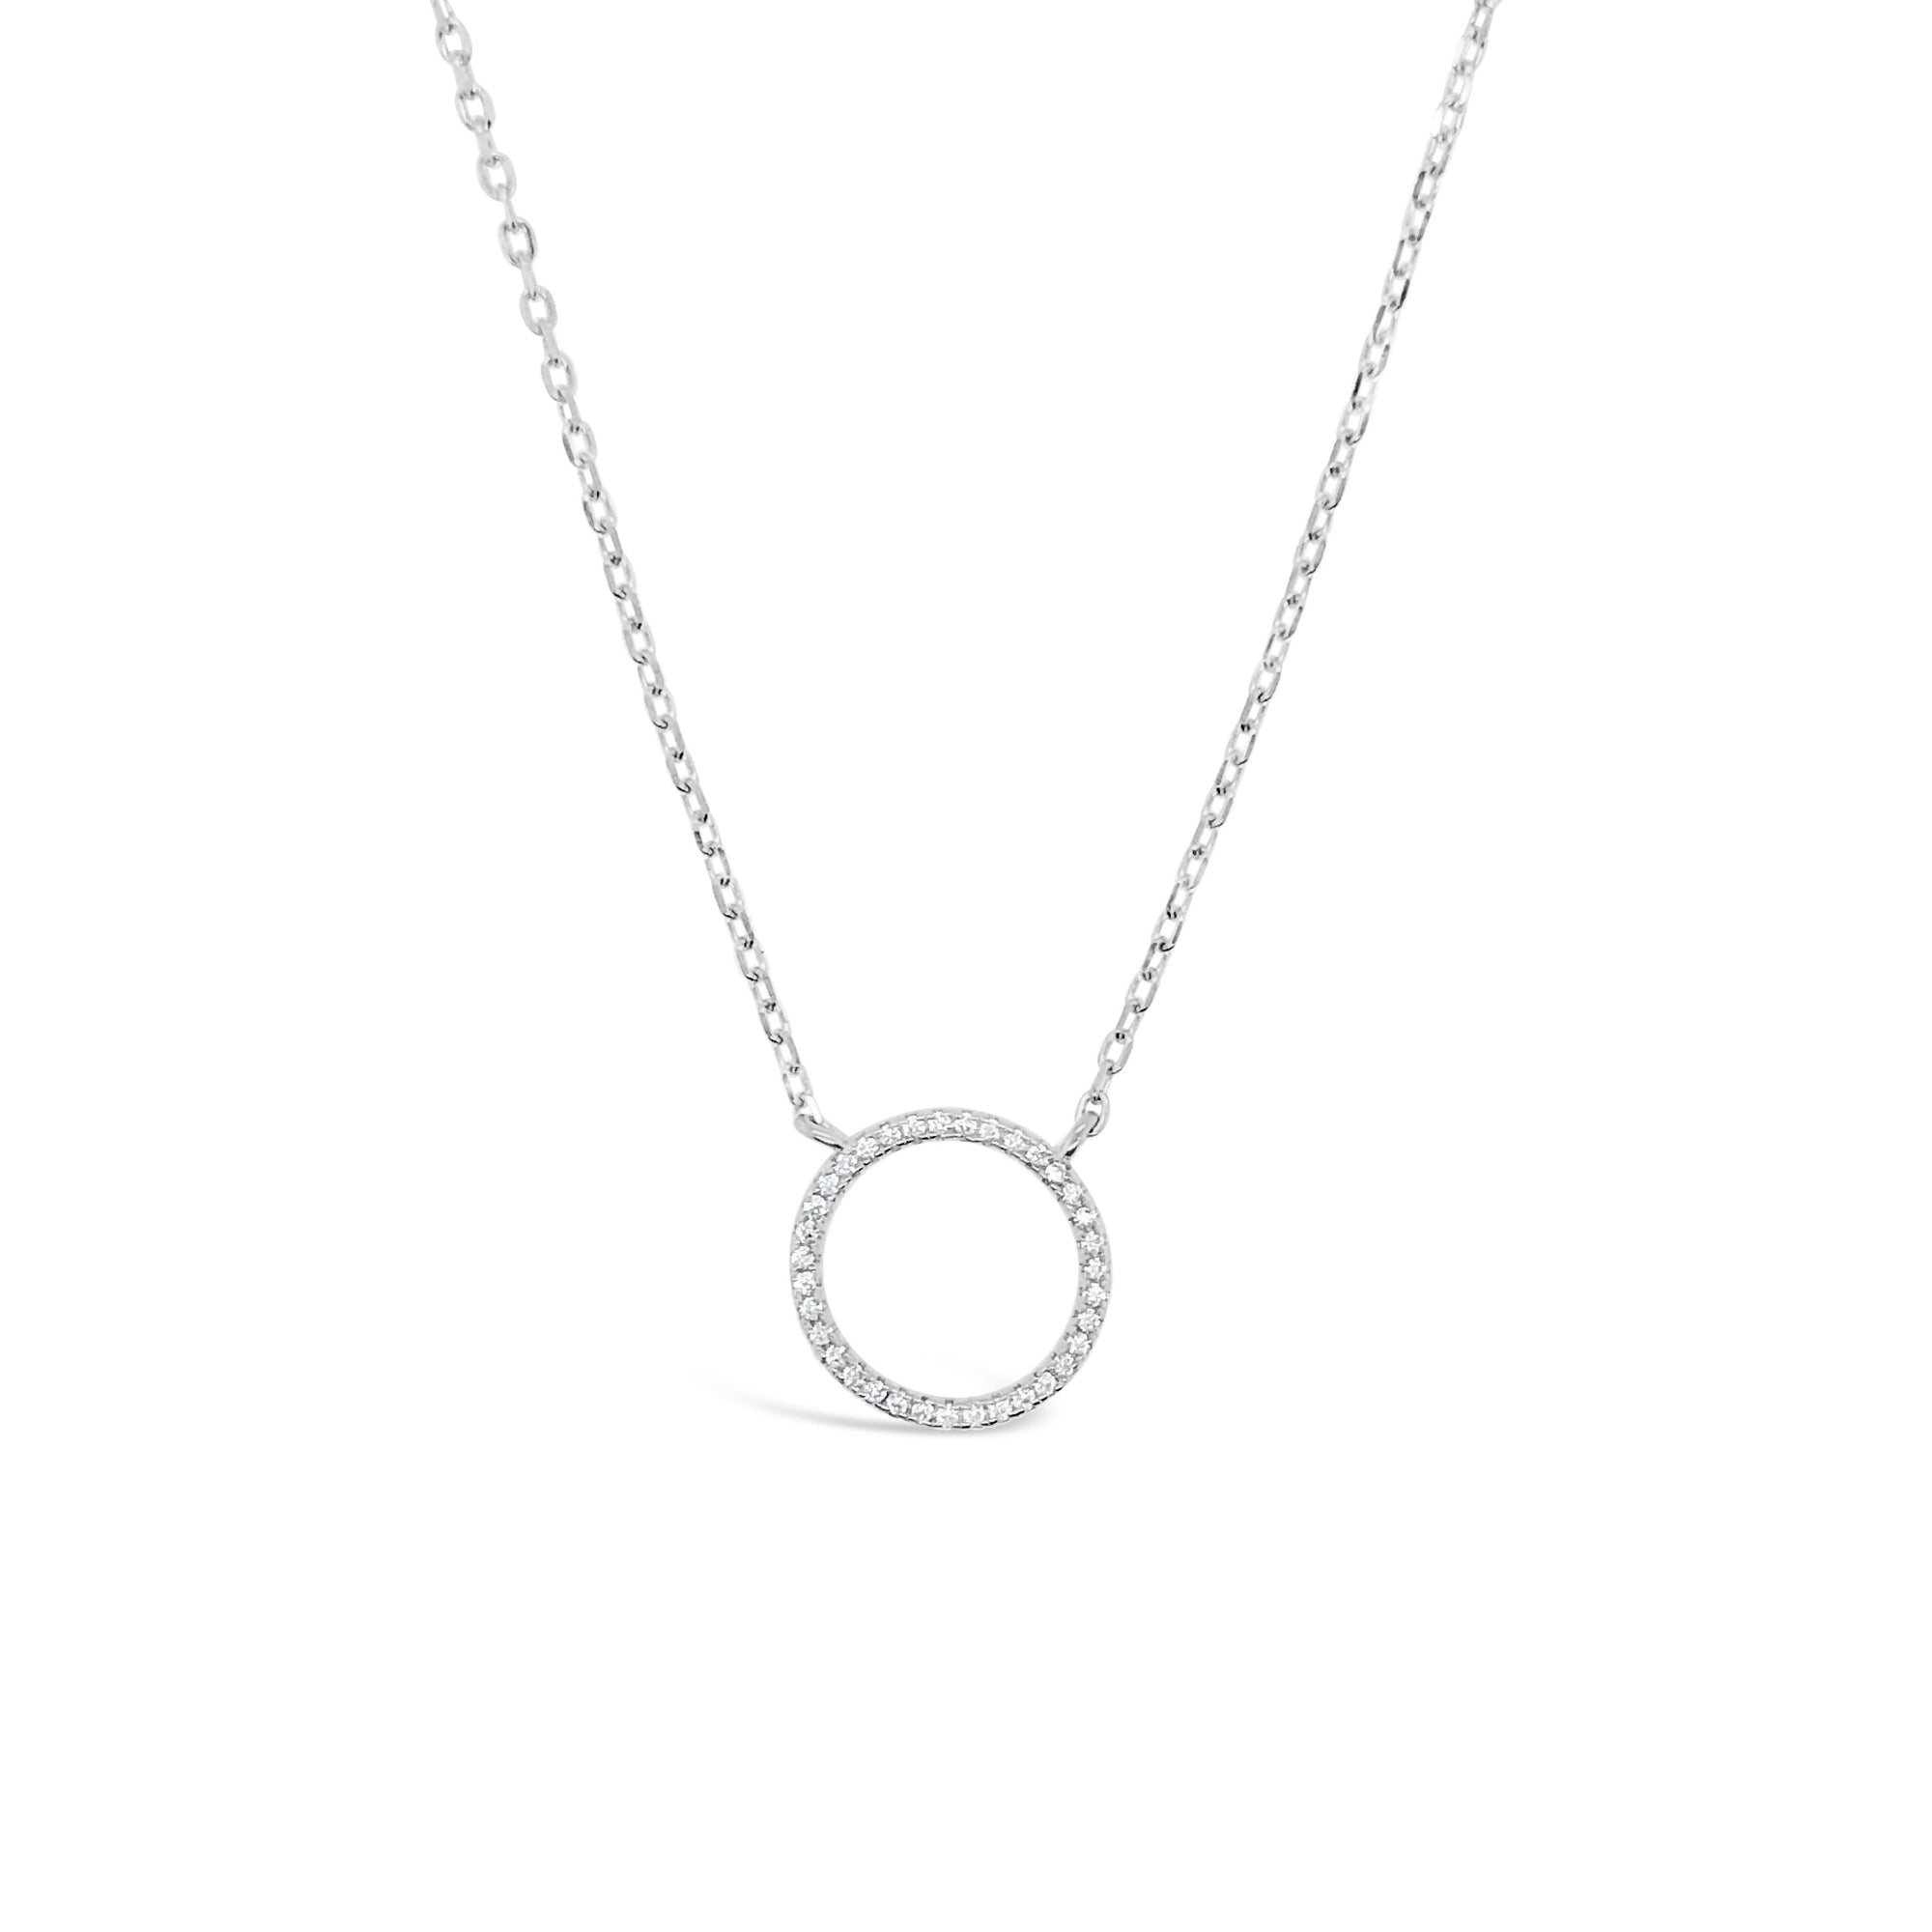 Duo Jewellery Necklaces Duo Circle of Life Necklace (Sterling Silver)